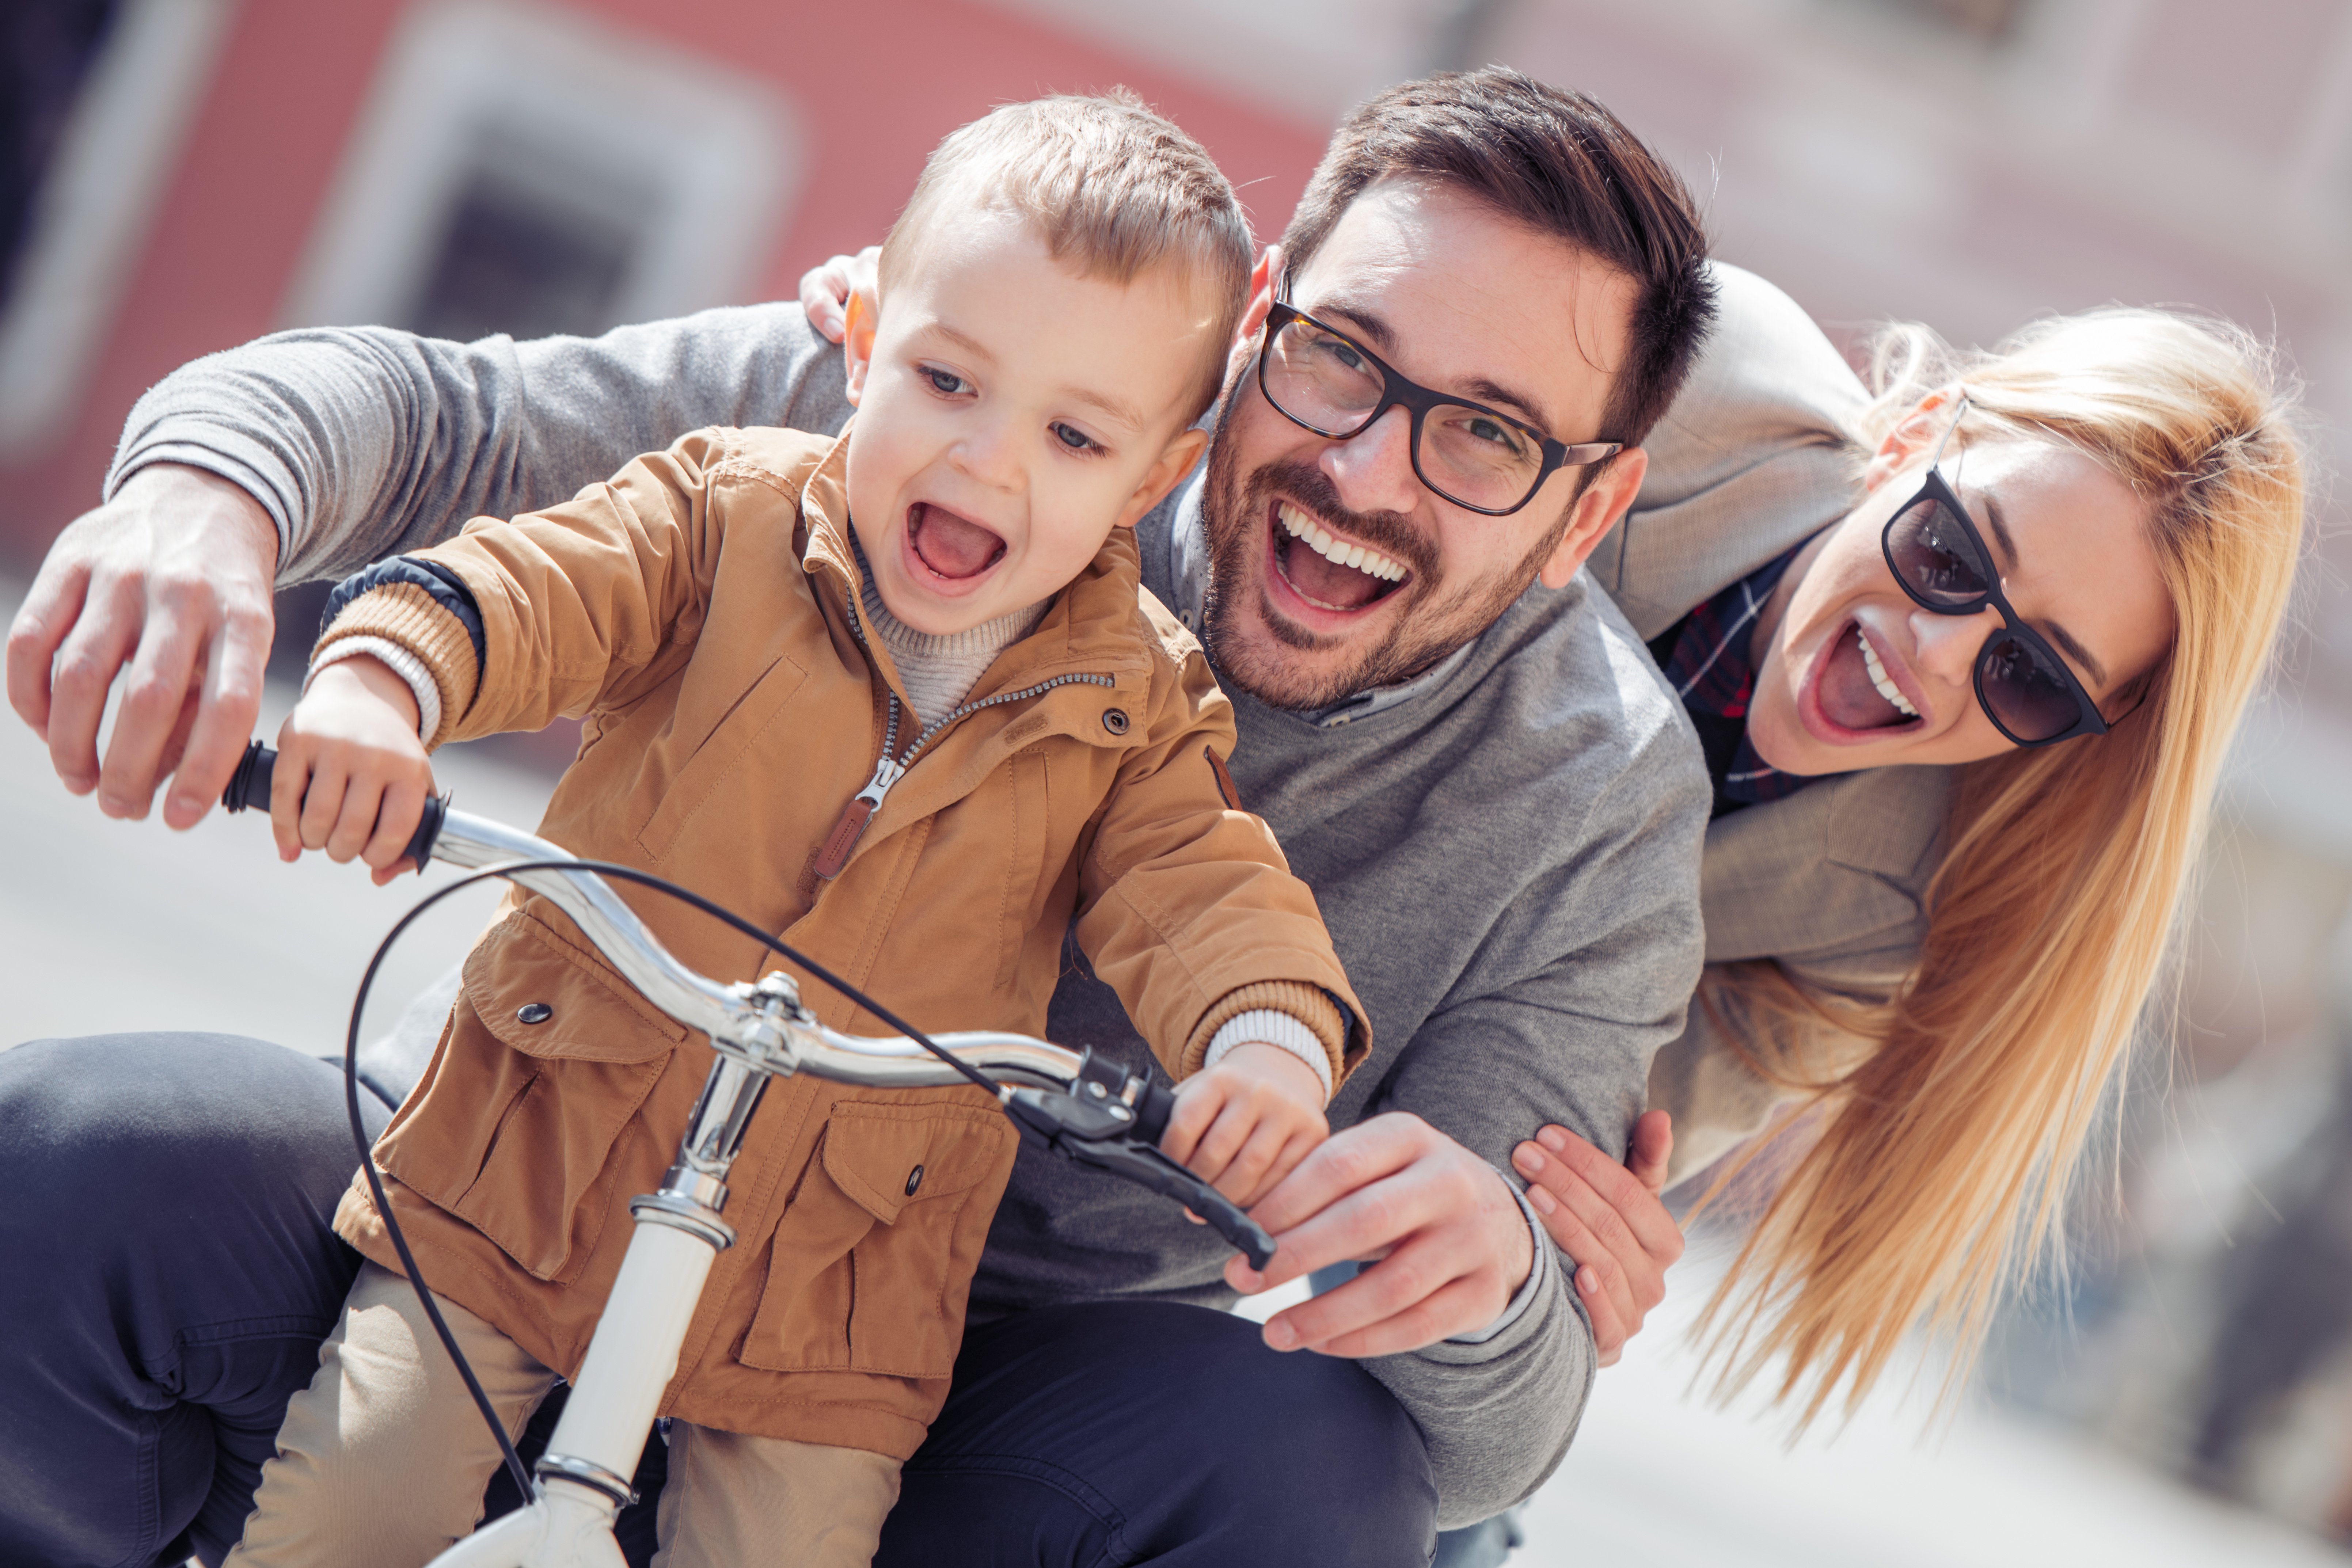 bike_ride-young-boy-learning-to-ride-mother-father-family-parents